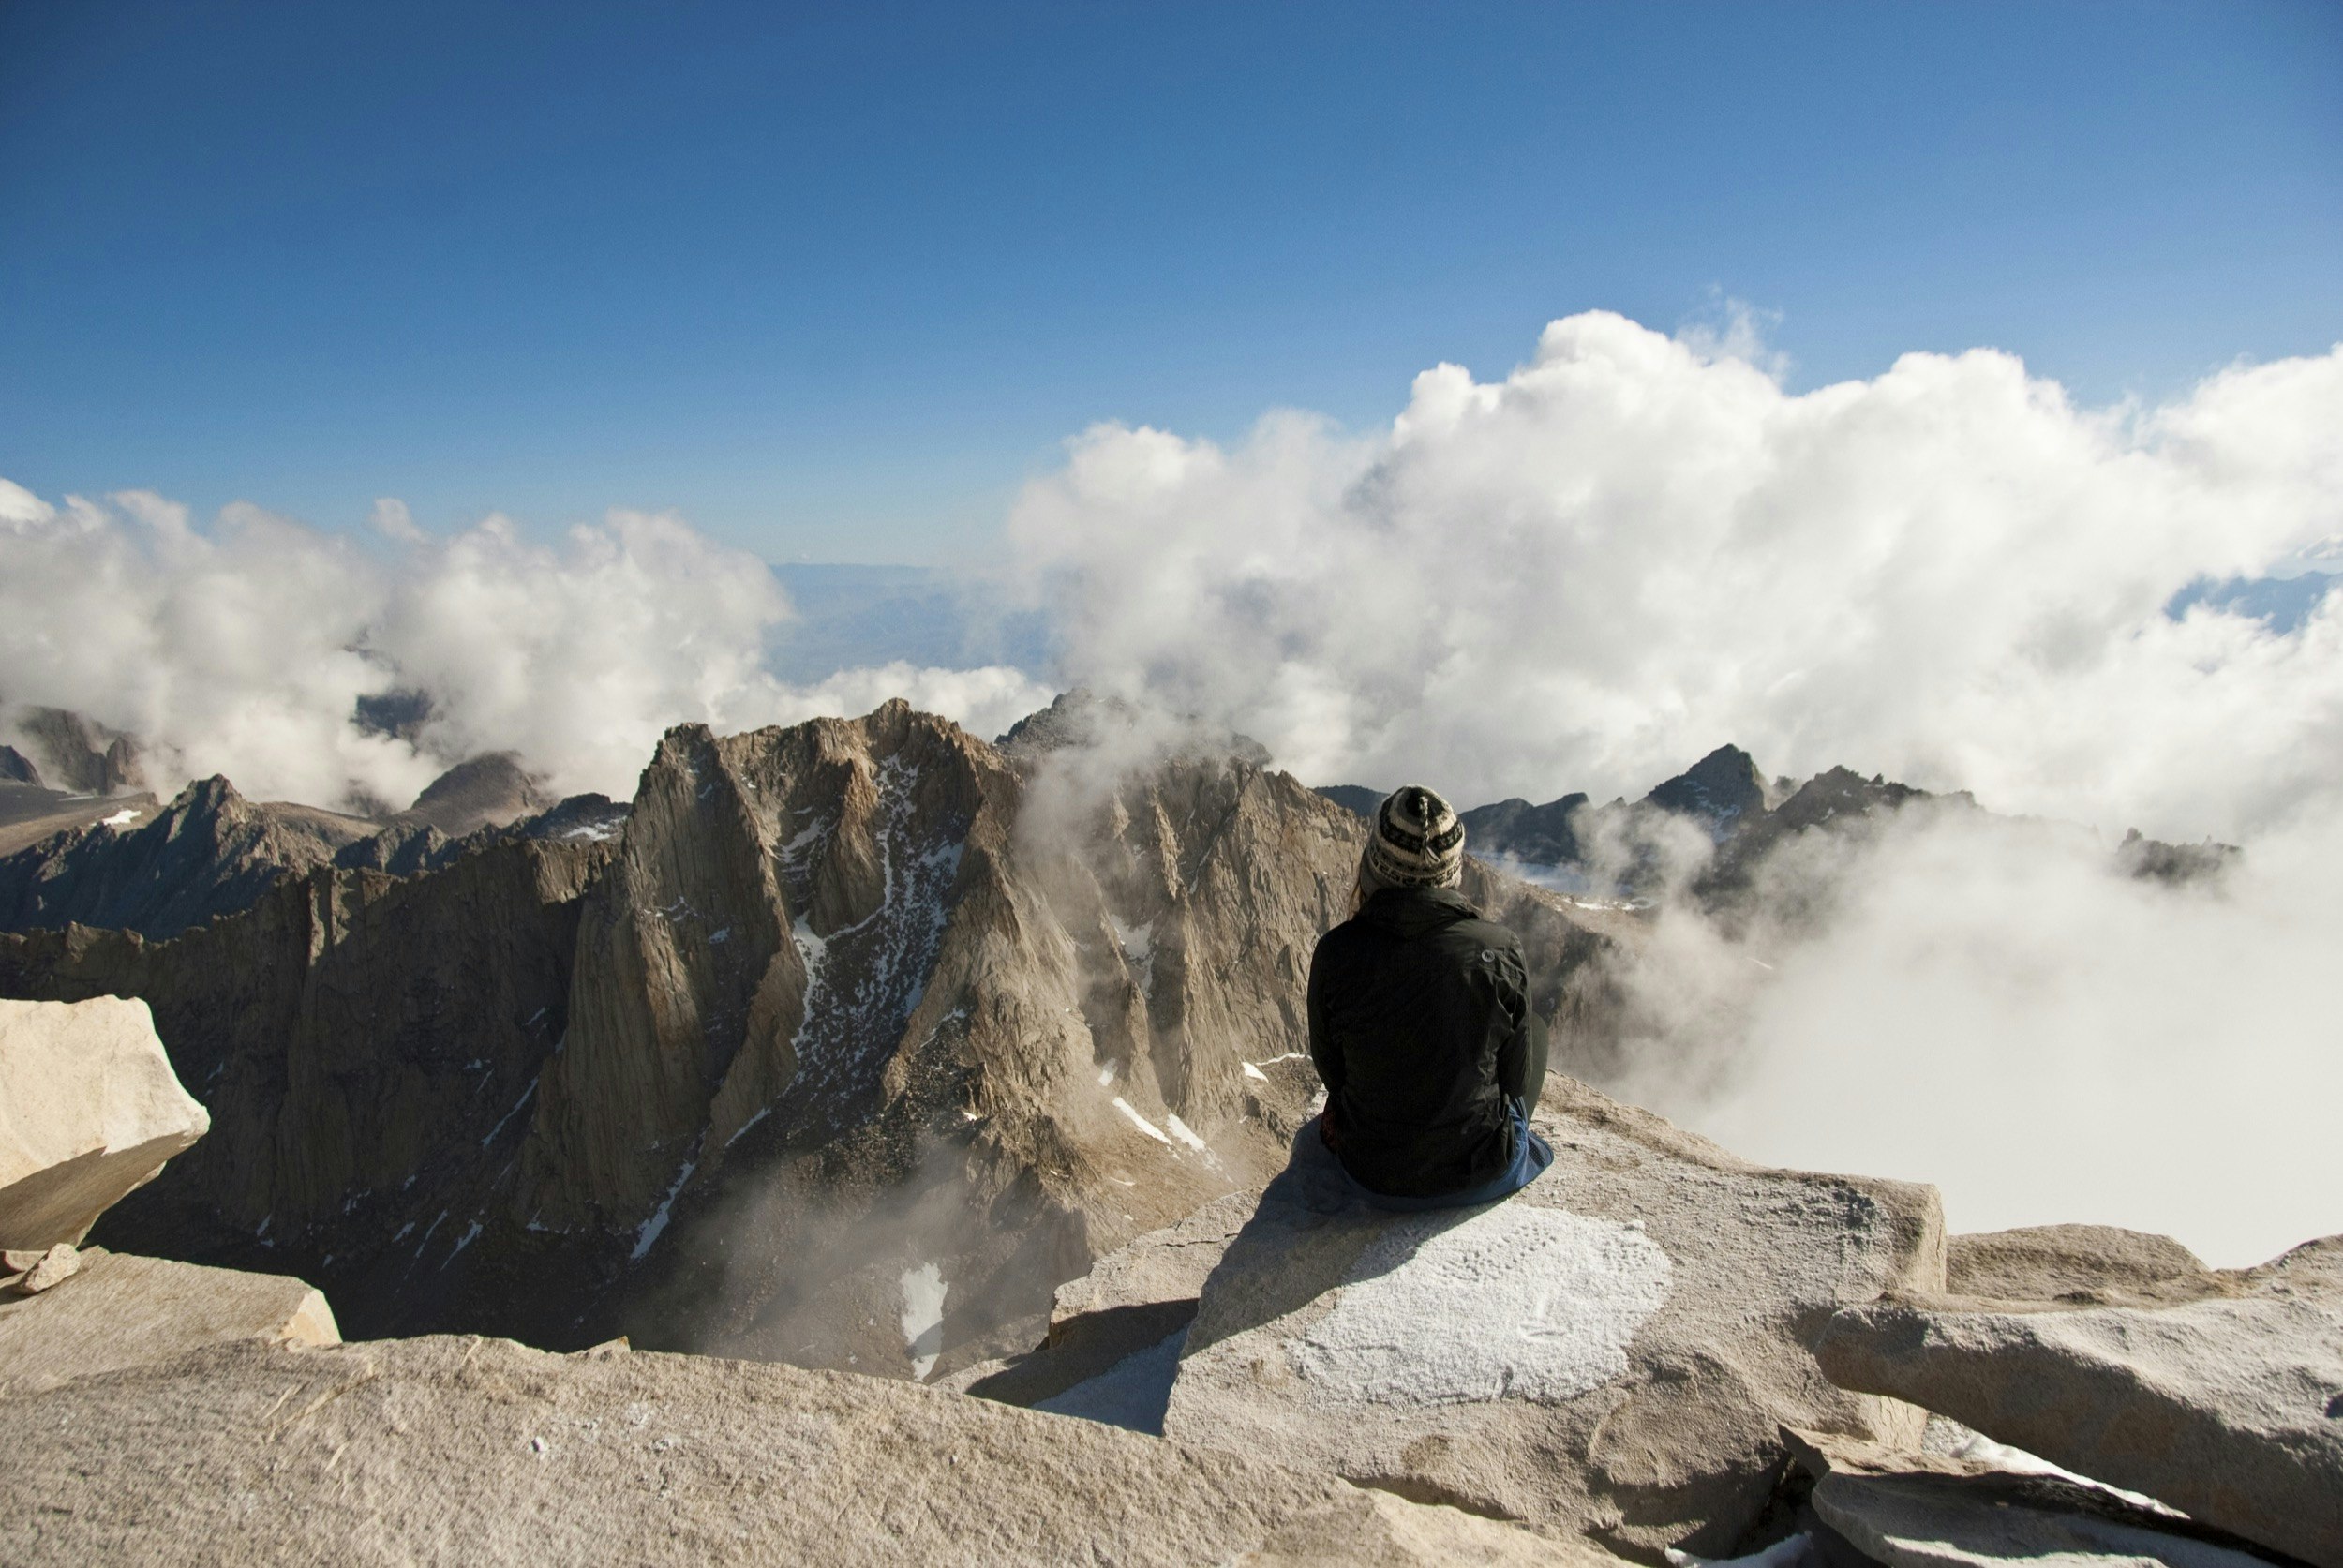 A woman sits at the summit of a mountain looking down at the clouds mixing around the surrounding peaks; Mountain climbing fourteeners